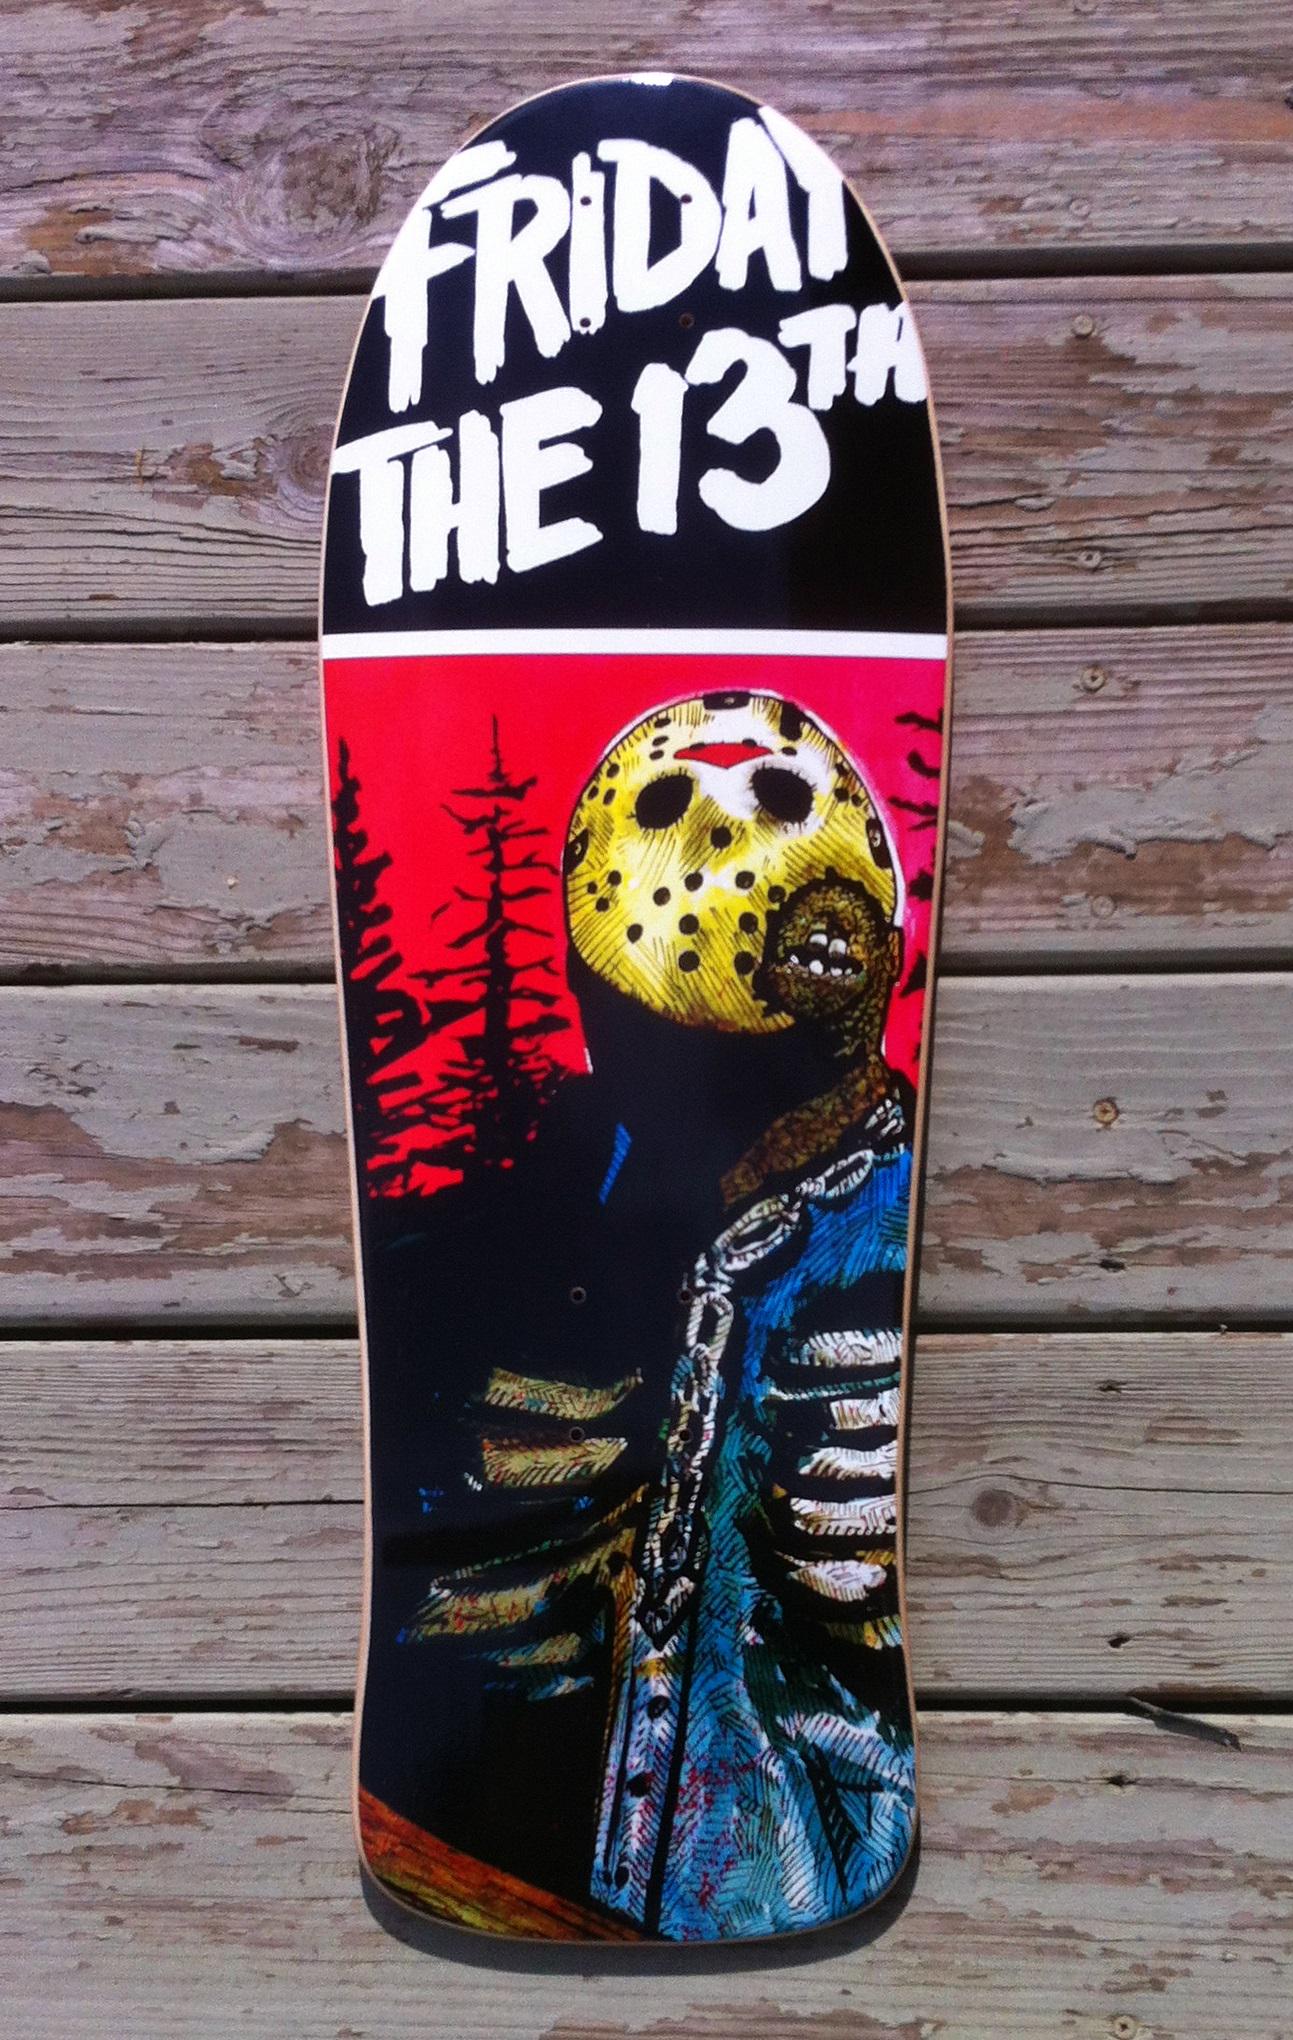 Friday the 13th Skate